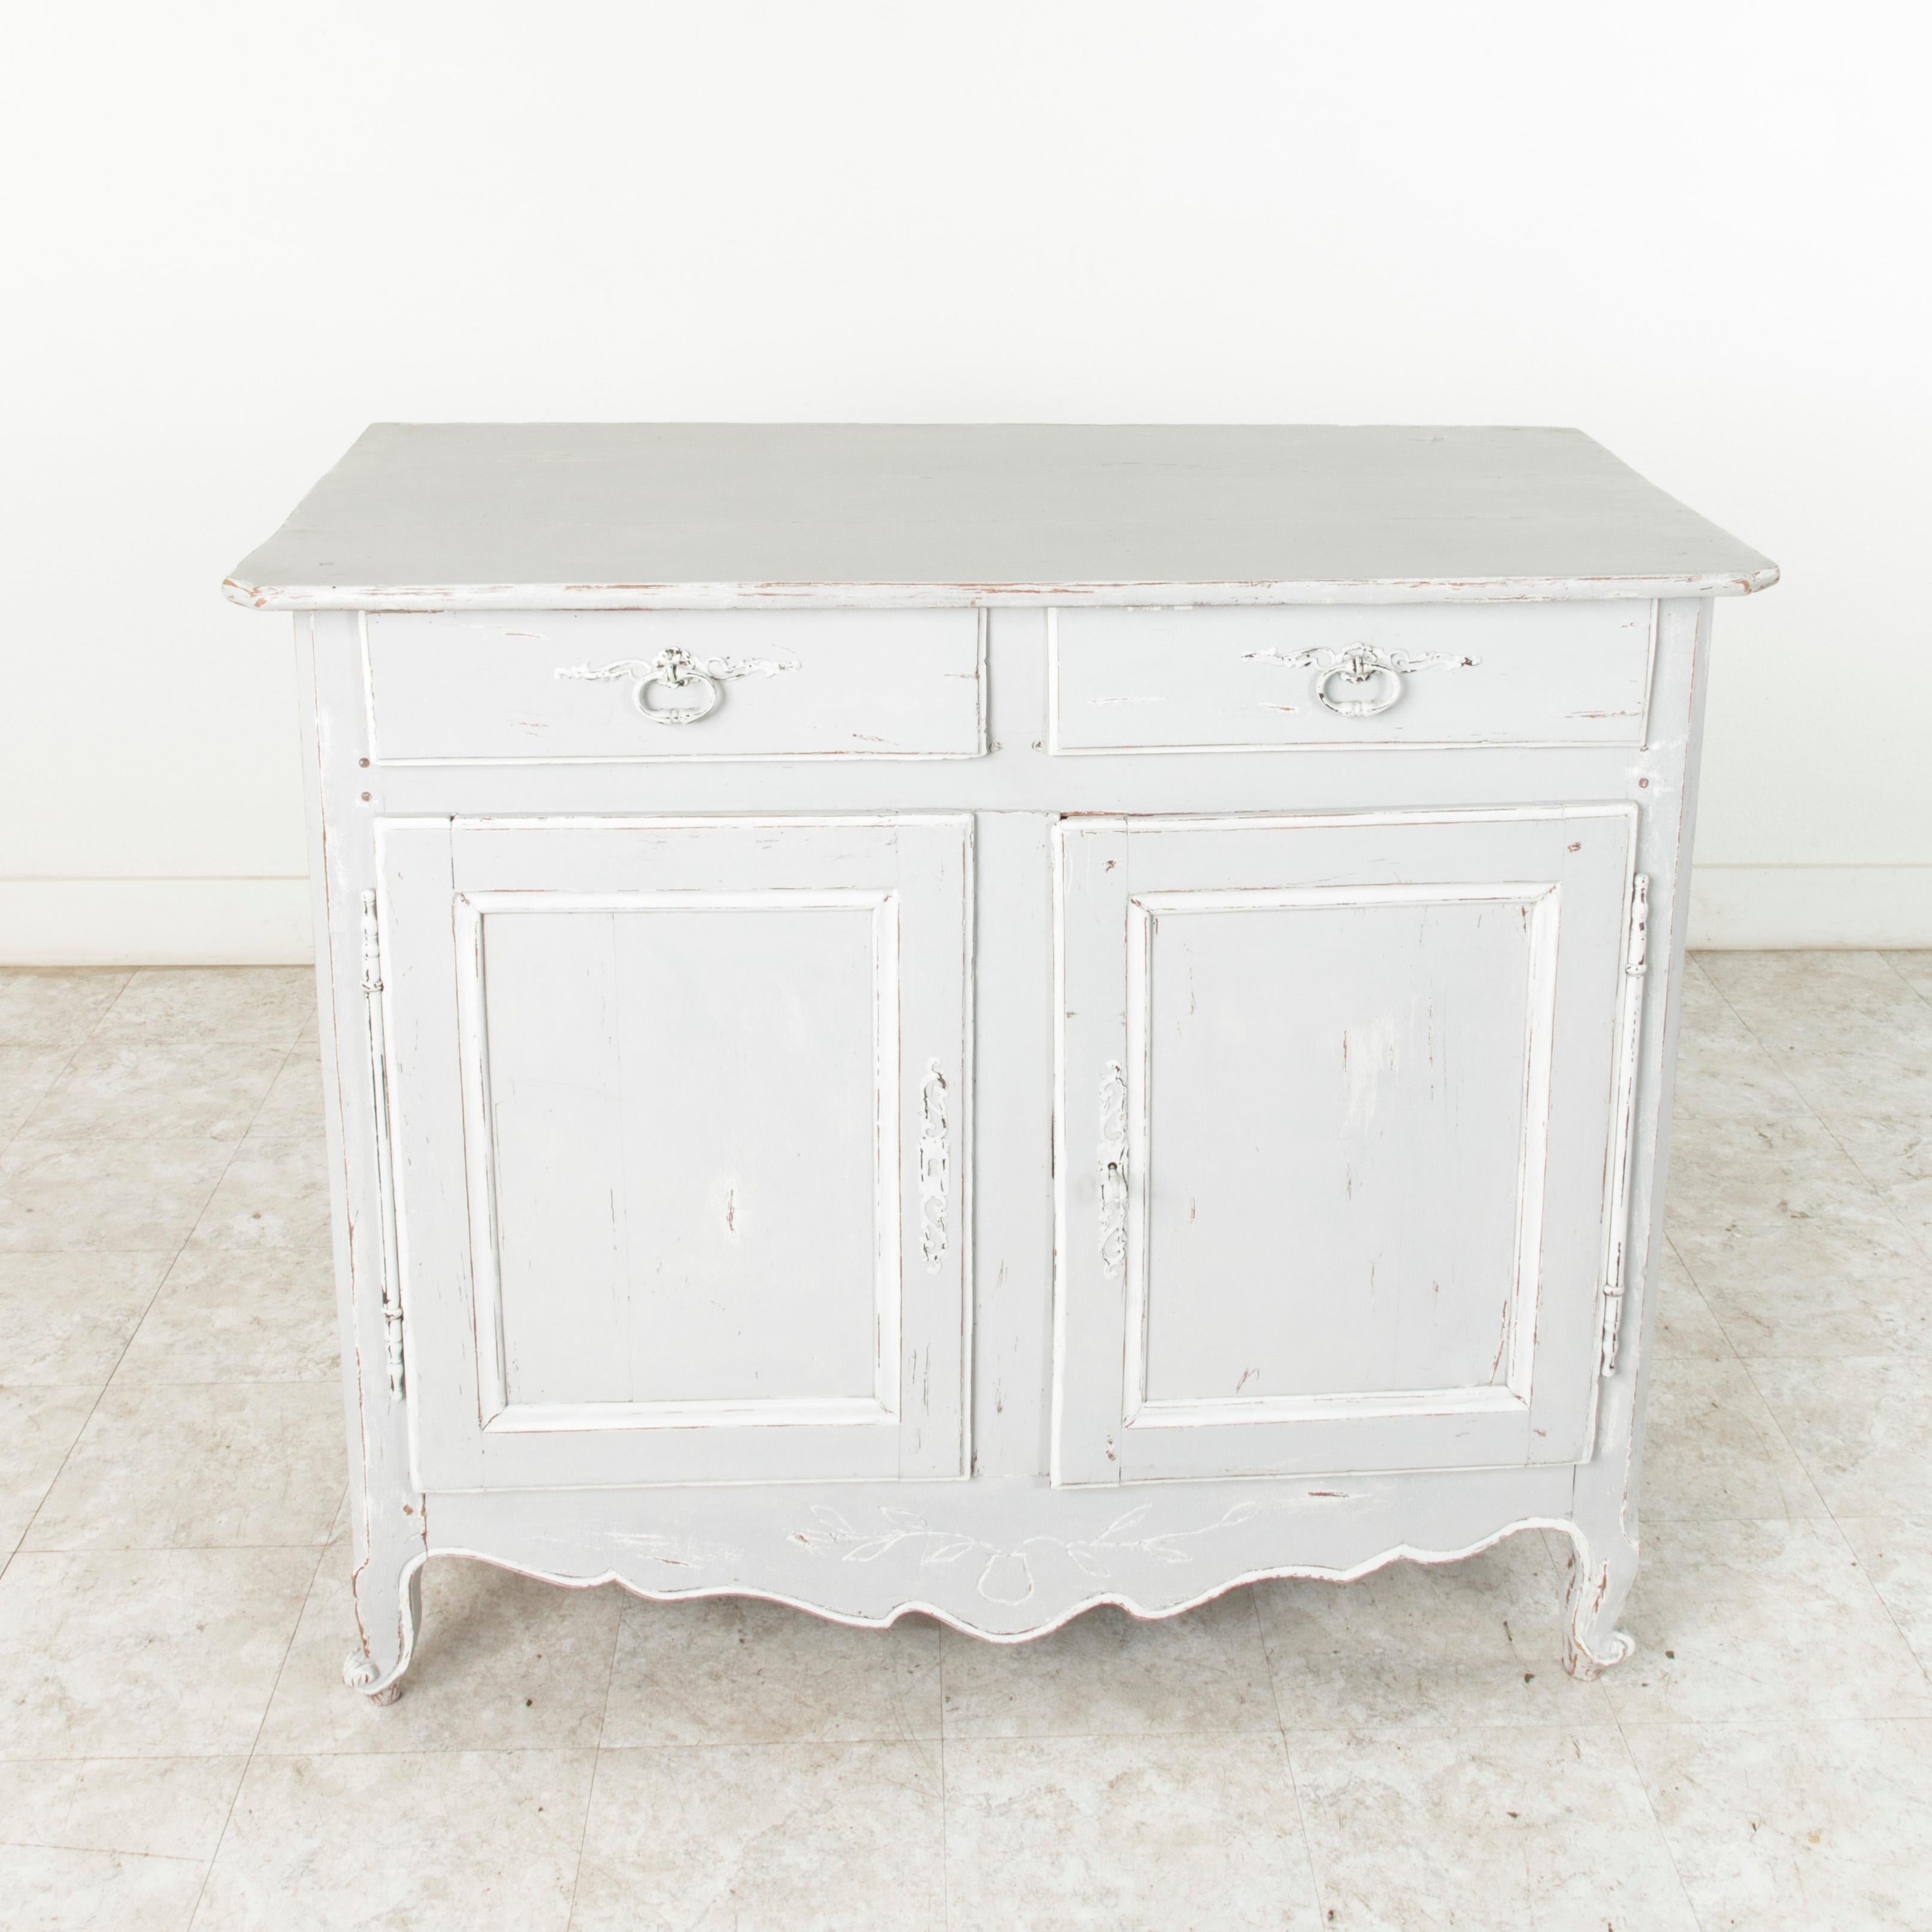 Called a buffet d'appui in French due to its elbow height, this late 19th century Louis XV style buffet from the region of Provence, France, stands at 42 inches in height. Painted in a Marie Antoinette grey, this piece features two upper drawers of